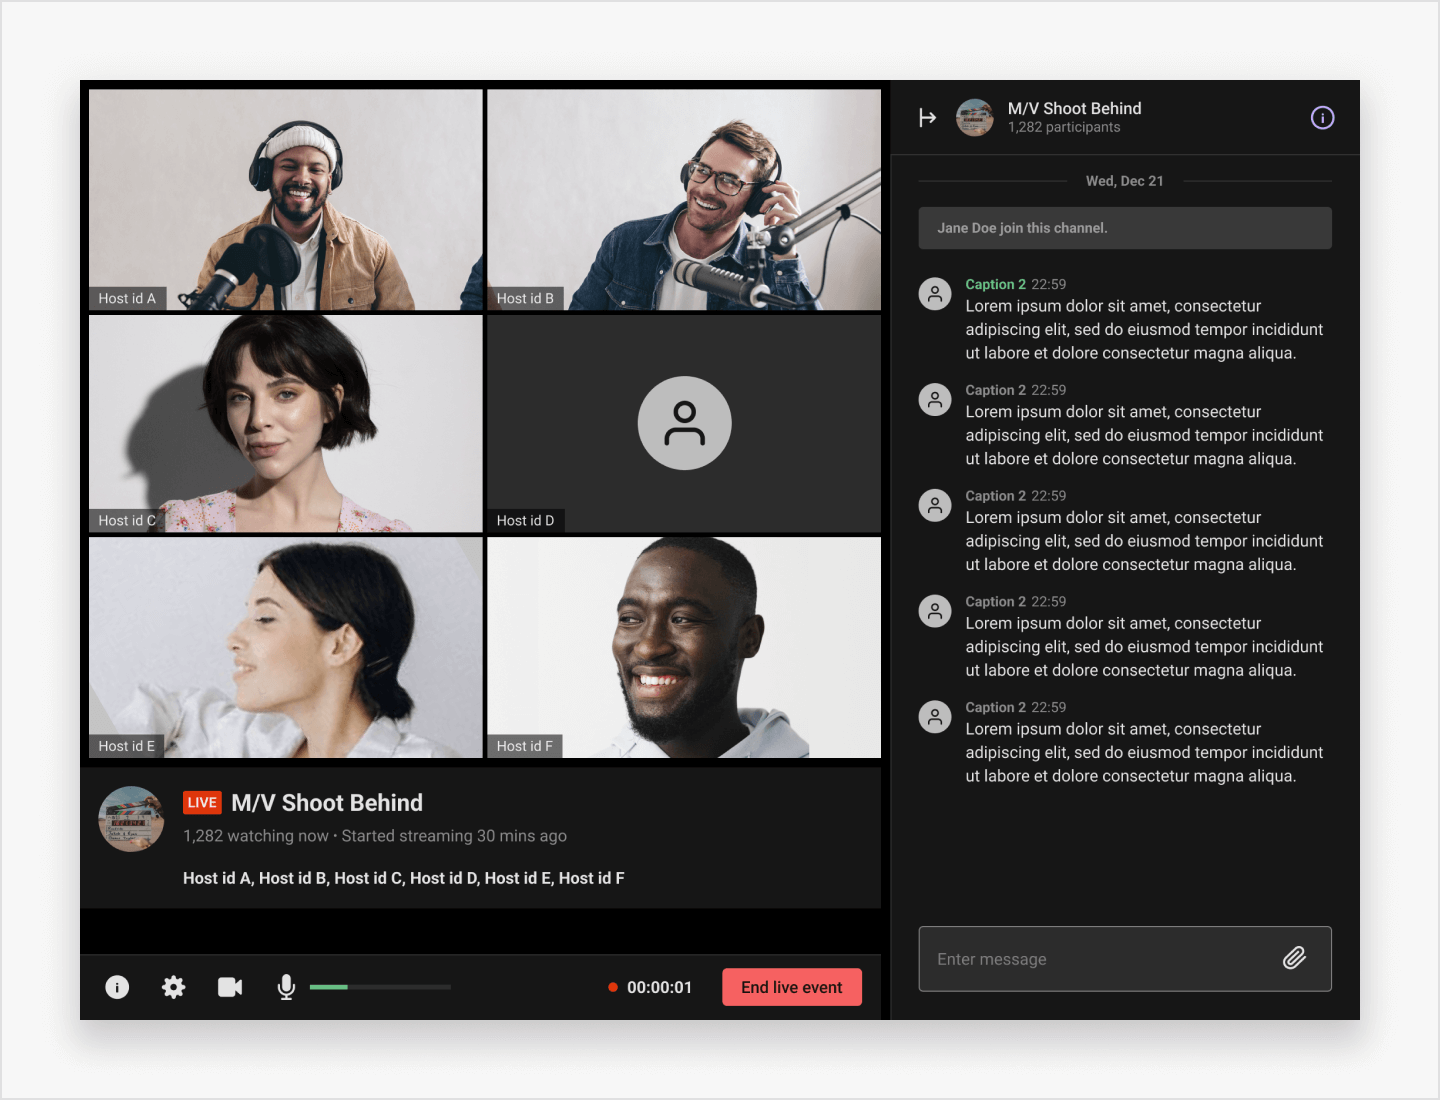 Image|Showing an UI of streaming view with multiple hosts